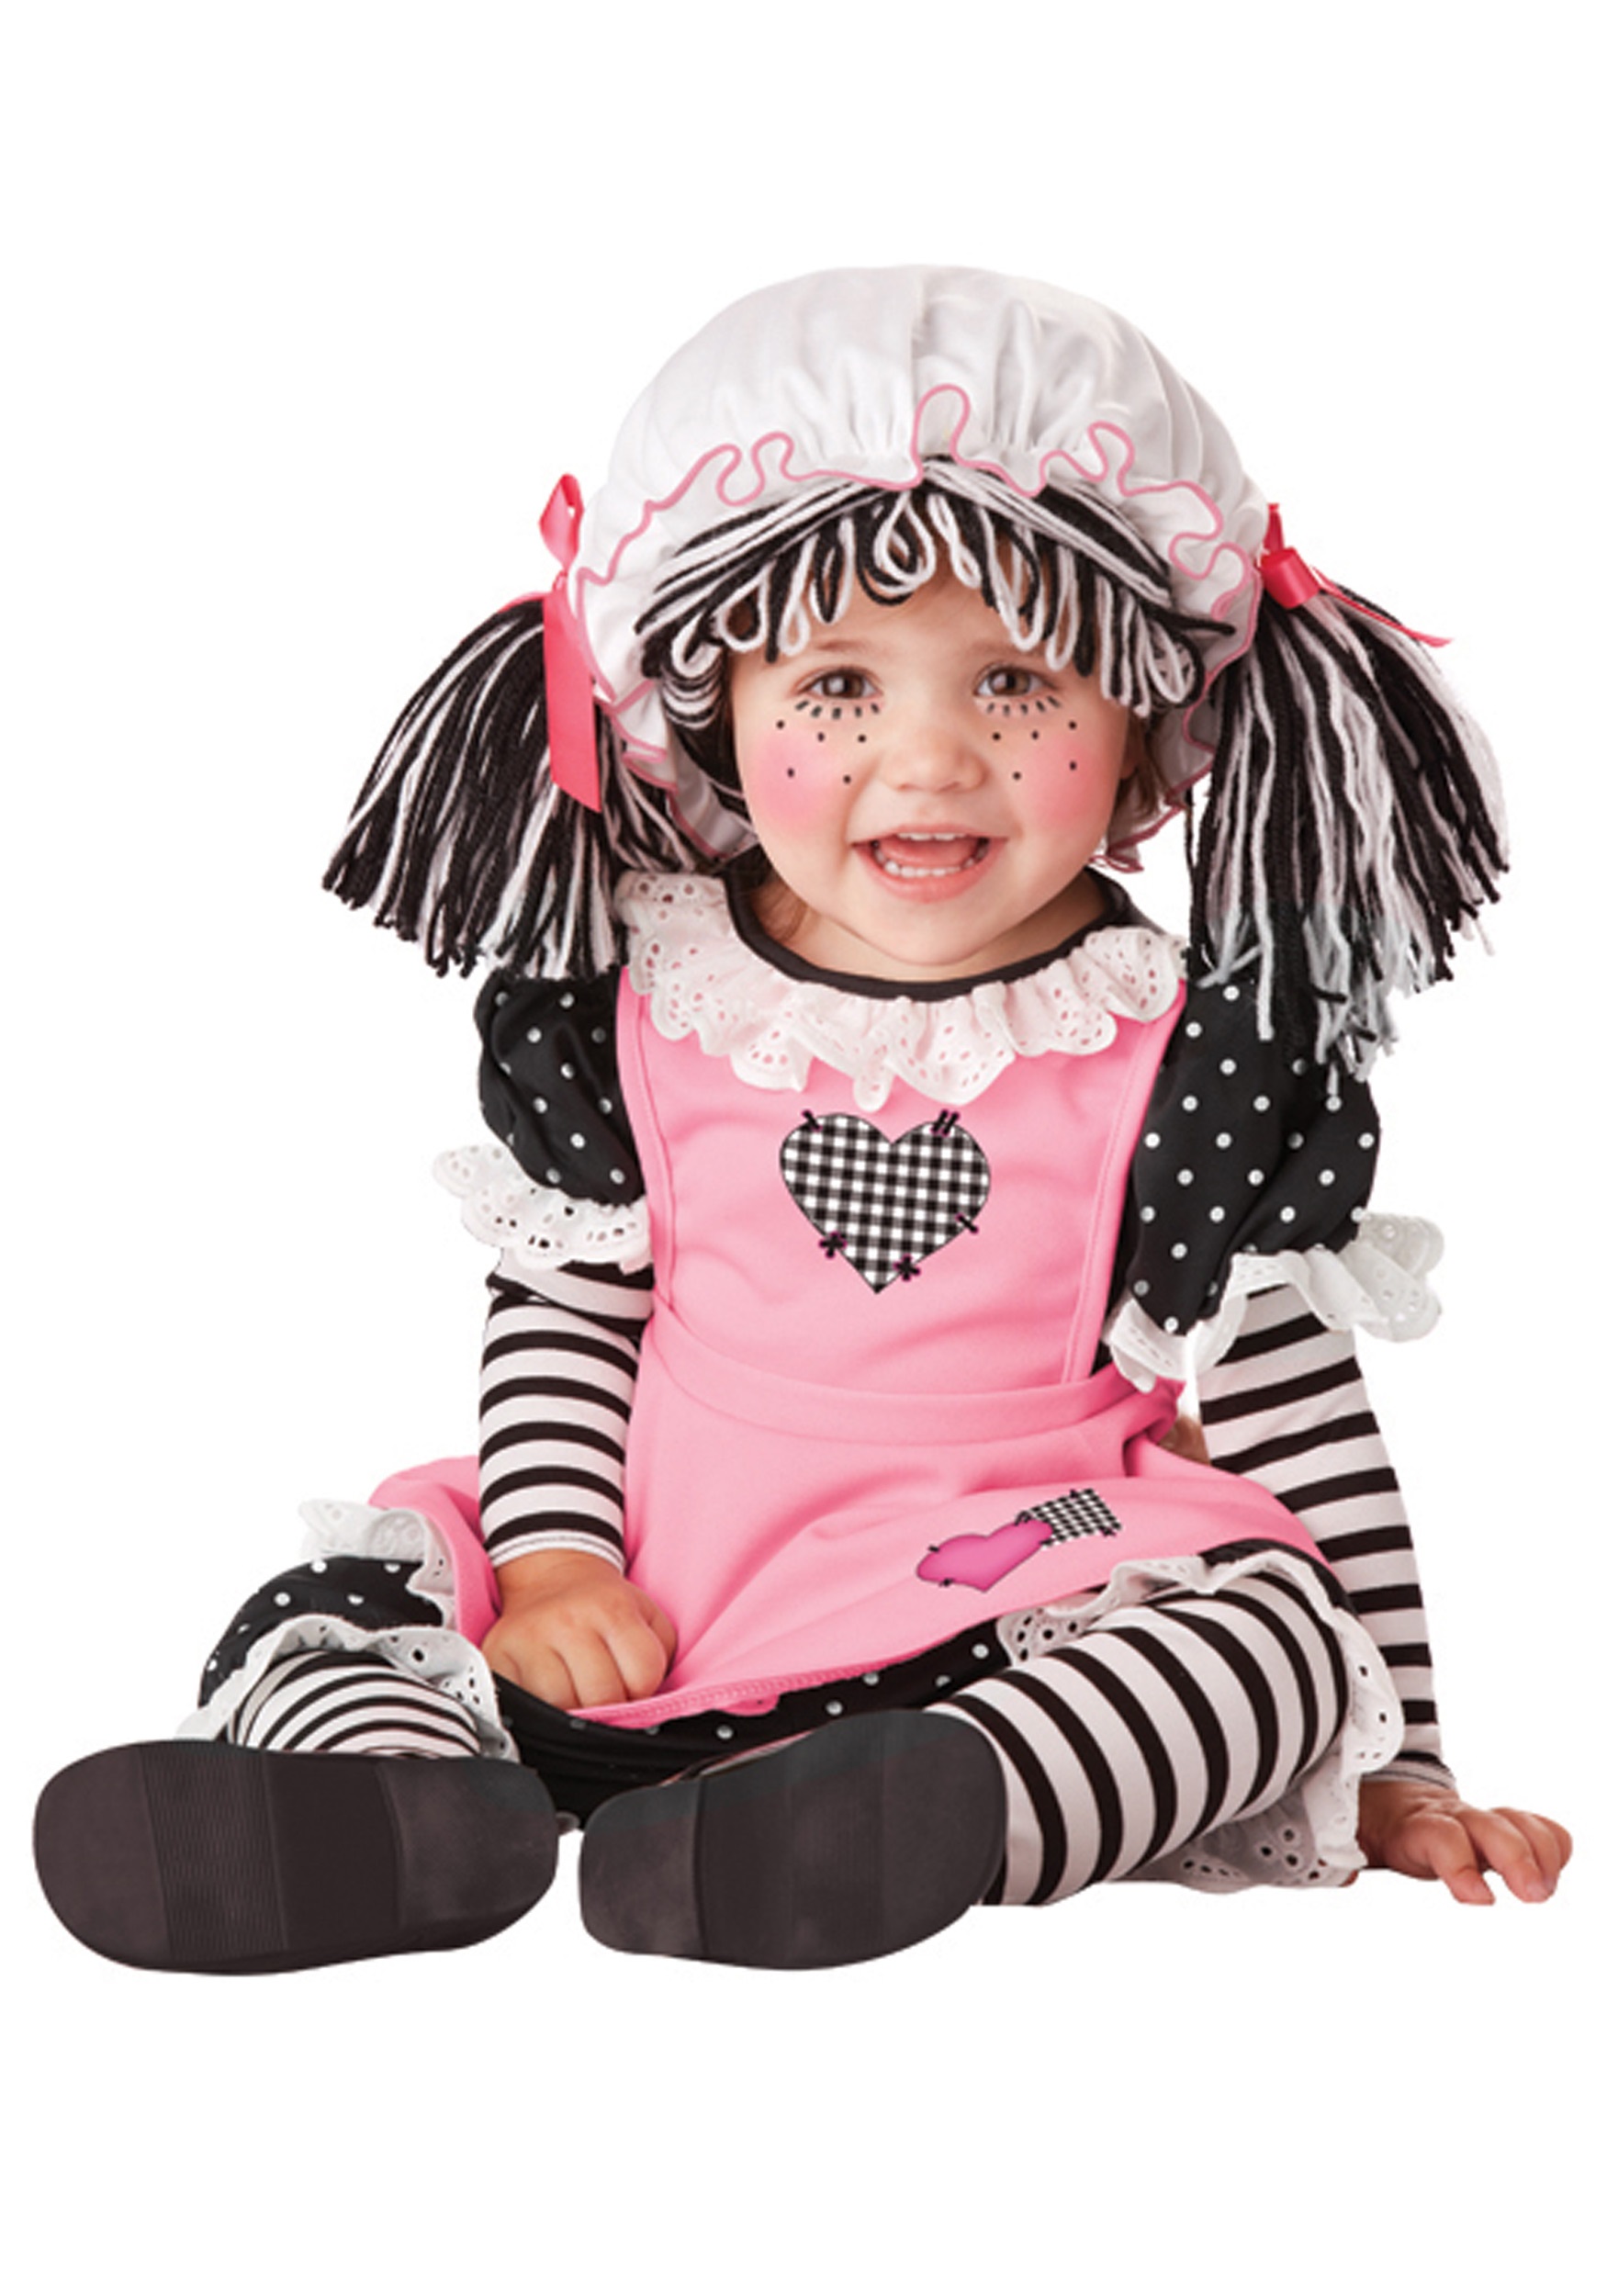 Photos - Fancy Dress California Costume Collection Infant Rag Doll Costume Black/Pink/W 